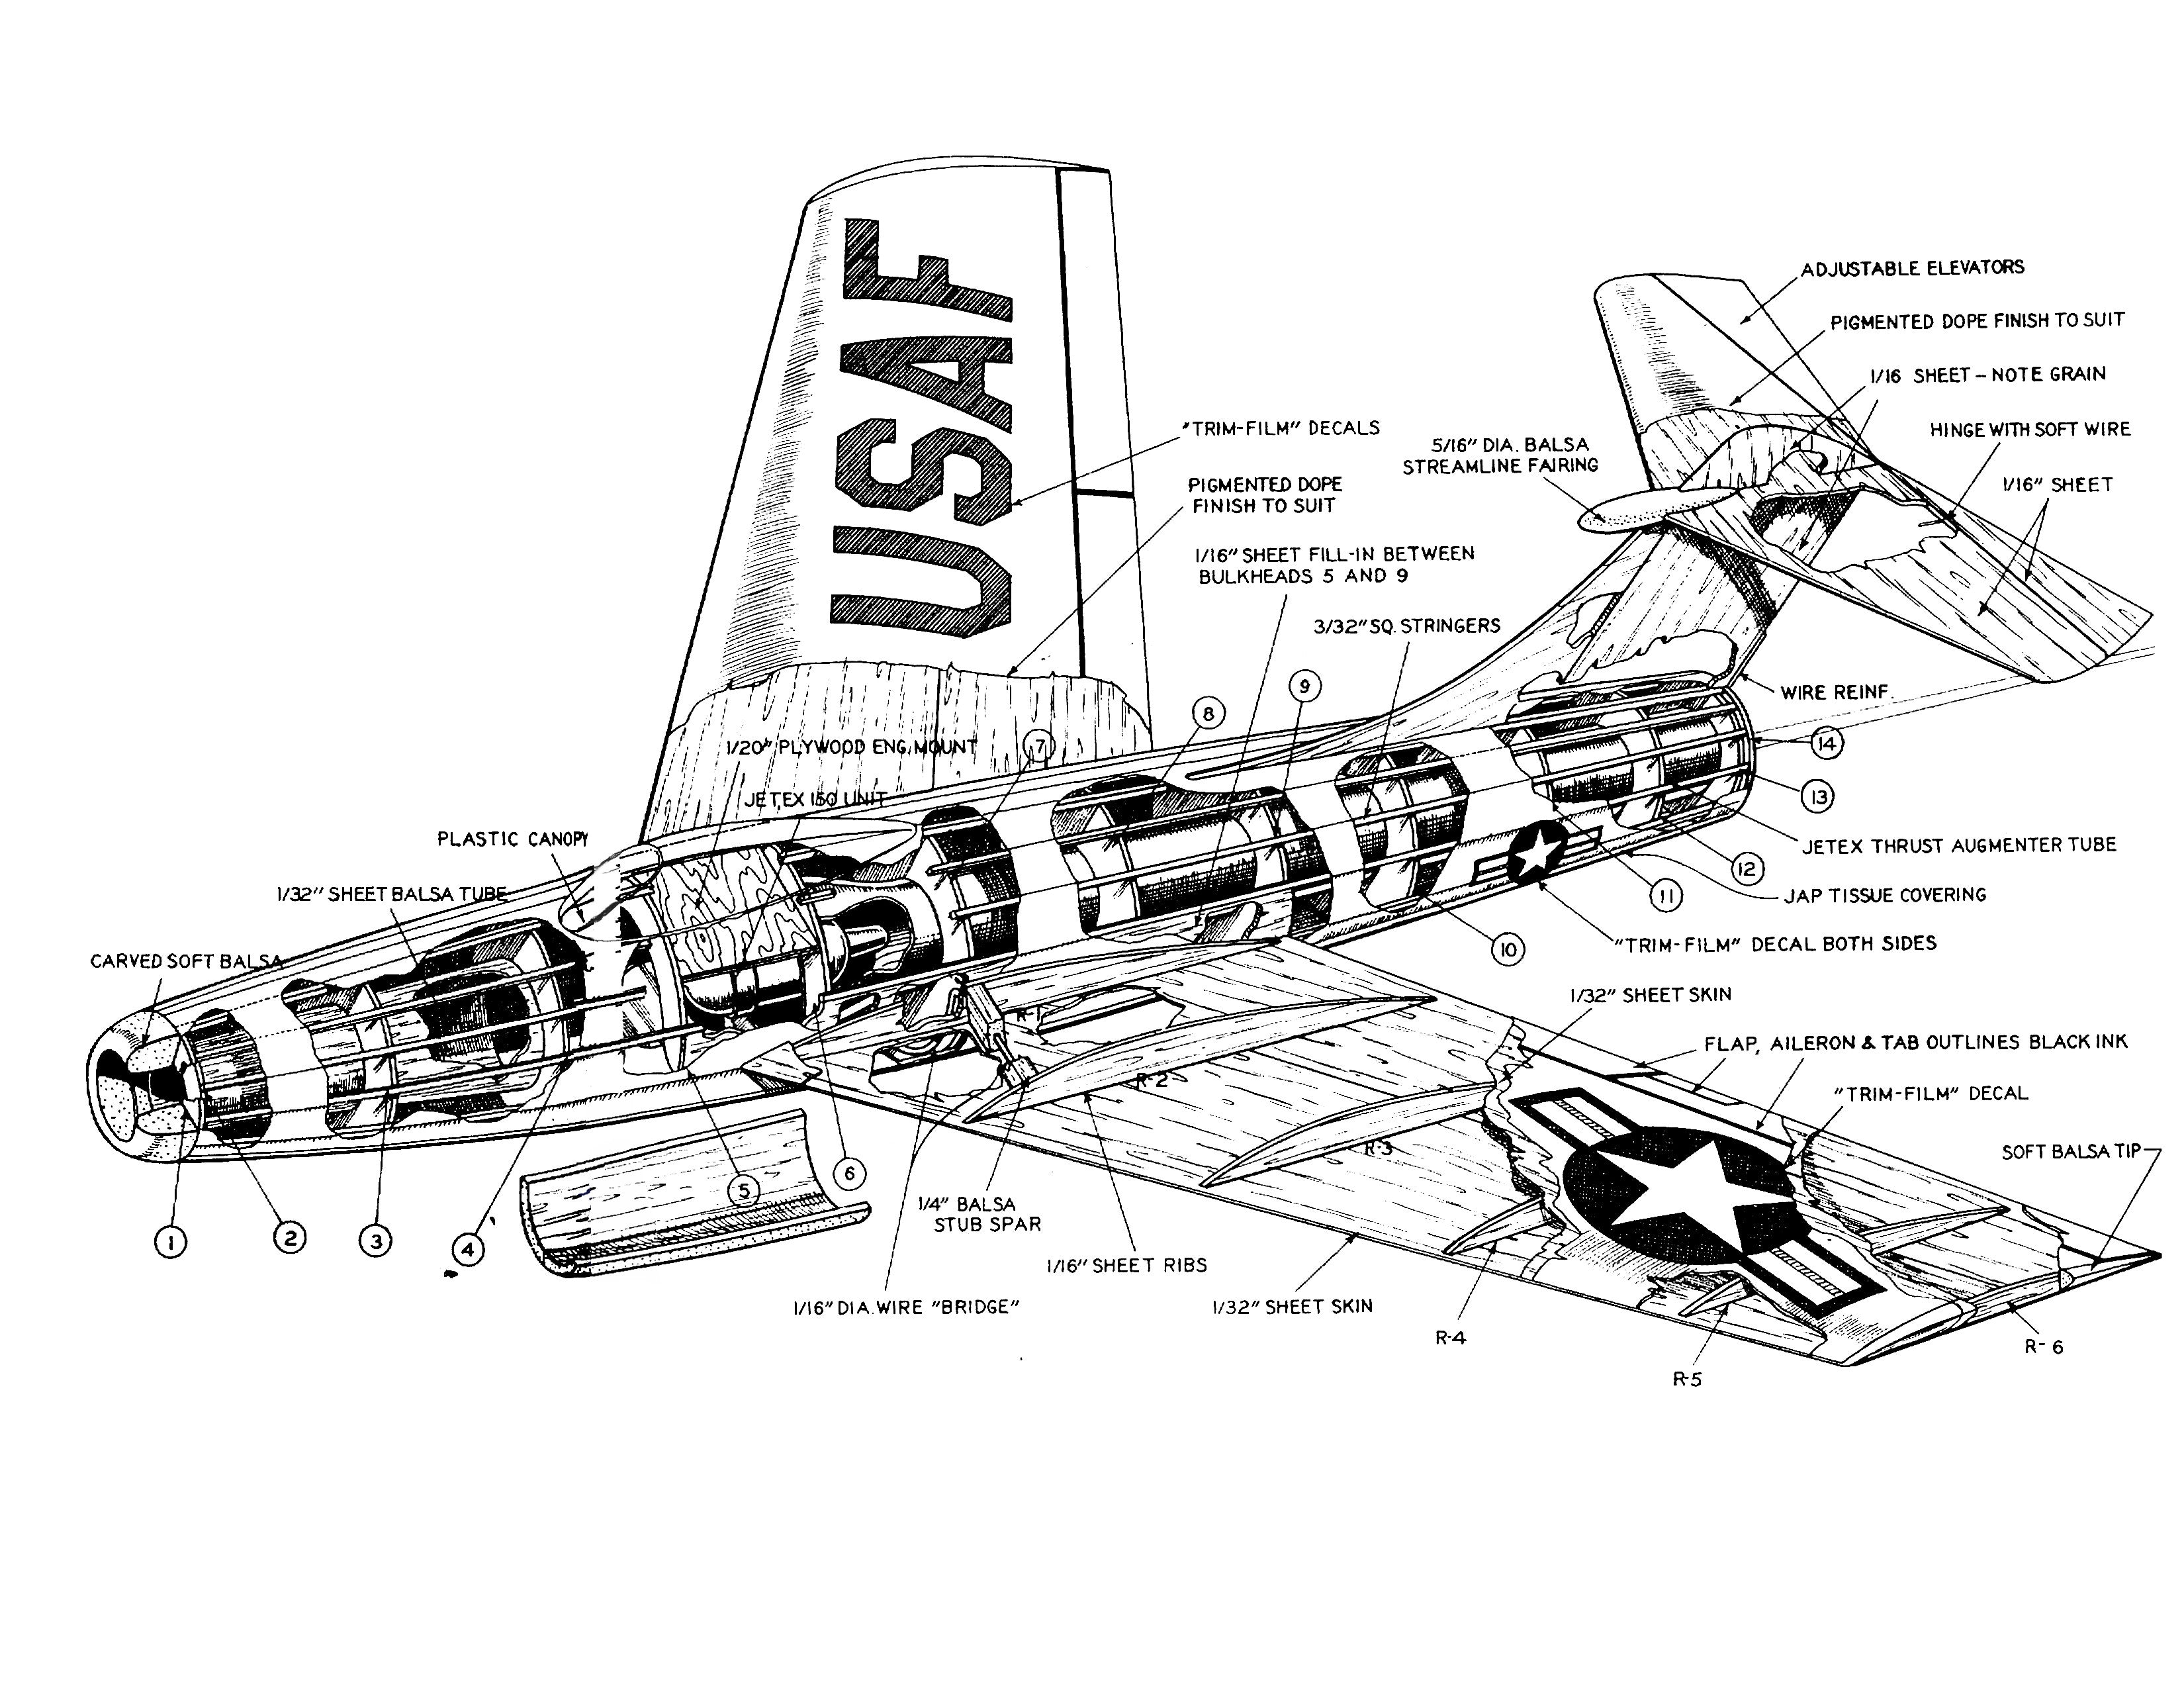 full size printed plan semi scale jetex fighter little augie  jetex 150  or convert to ducted fan